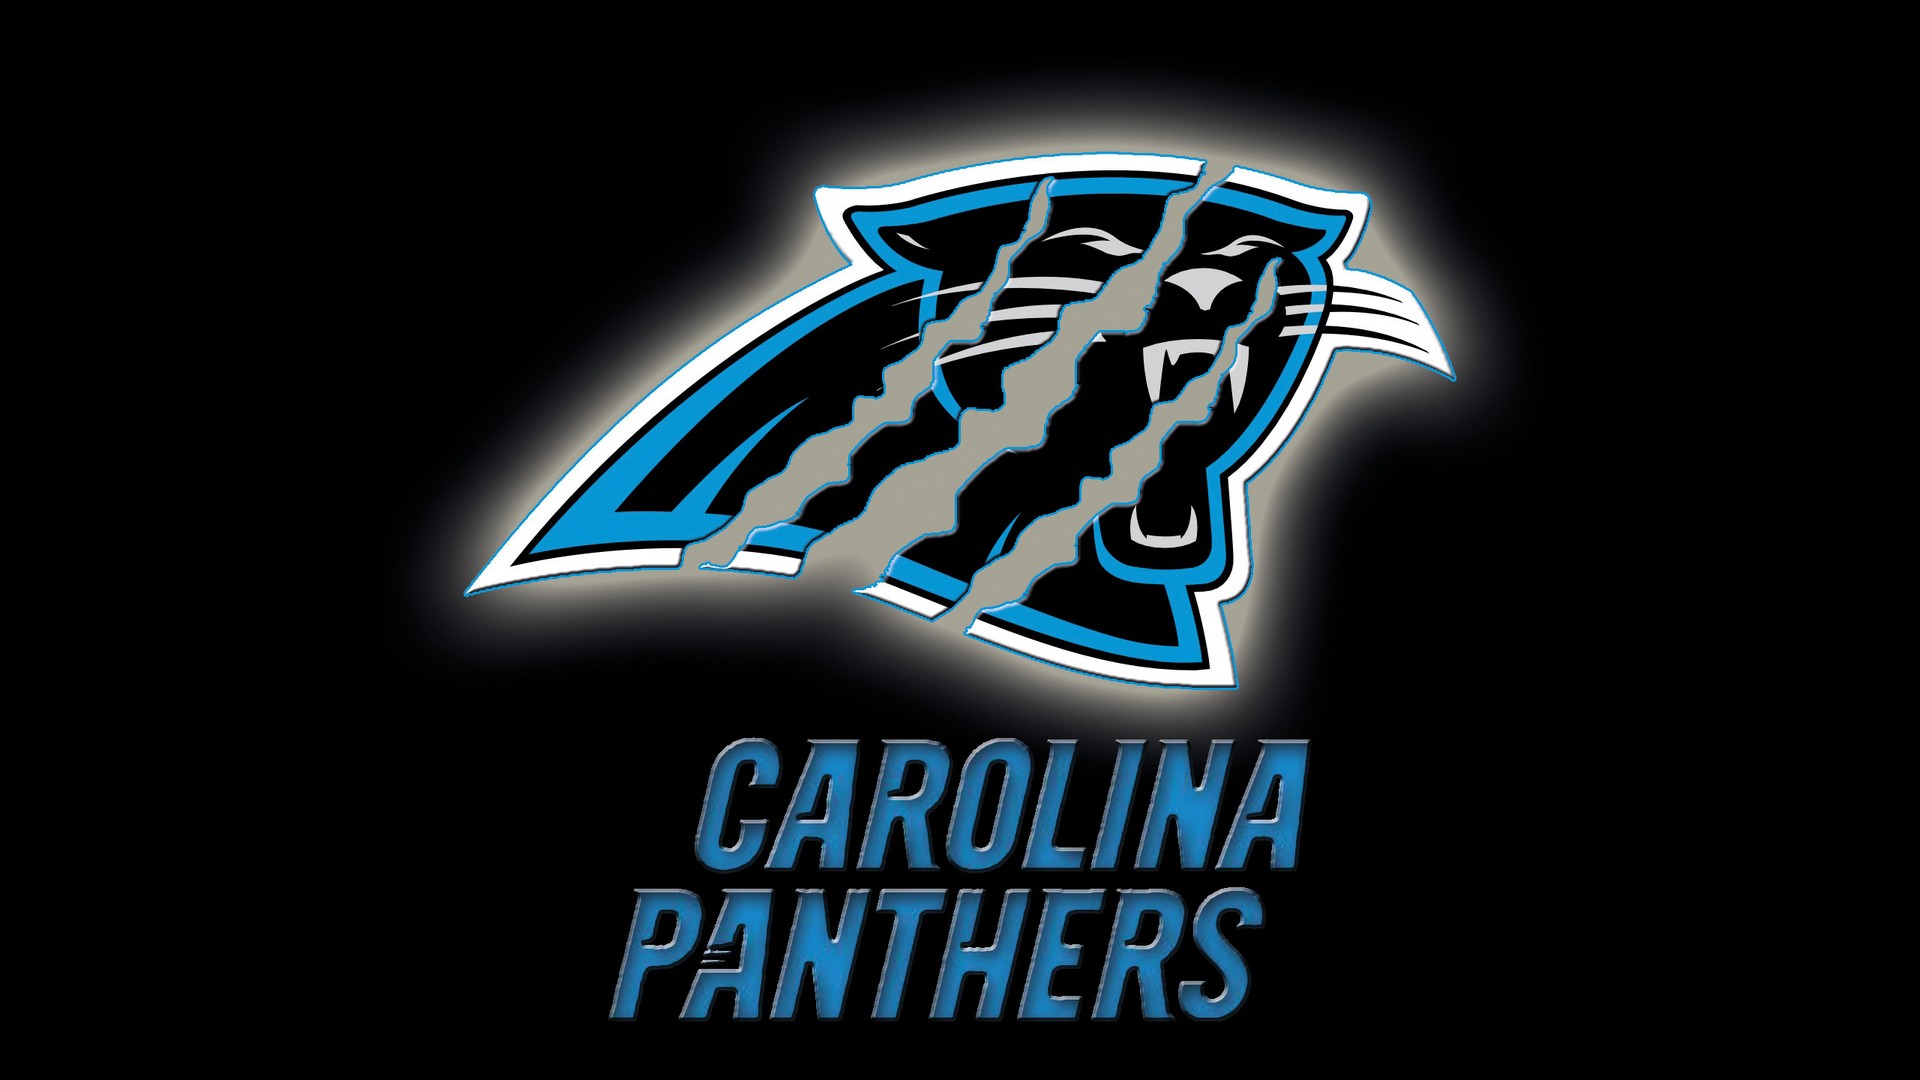 Carolina Panthers For Desktop Wallpaper With Resolution 1920X1080